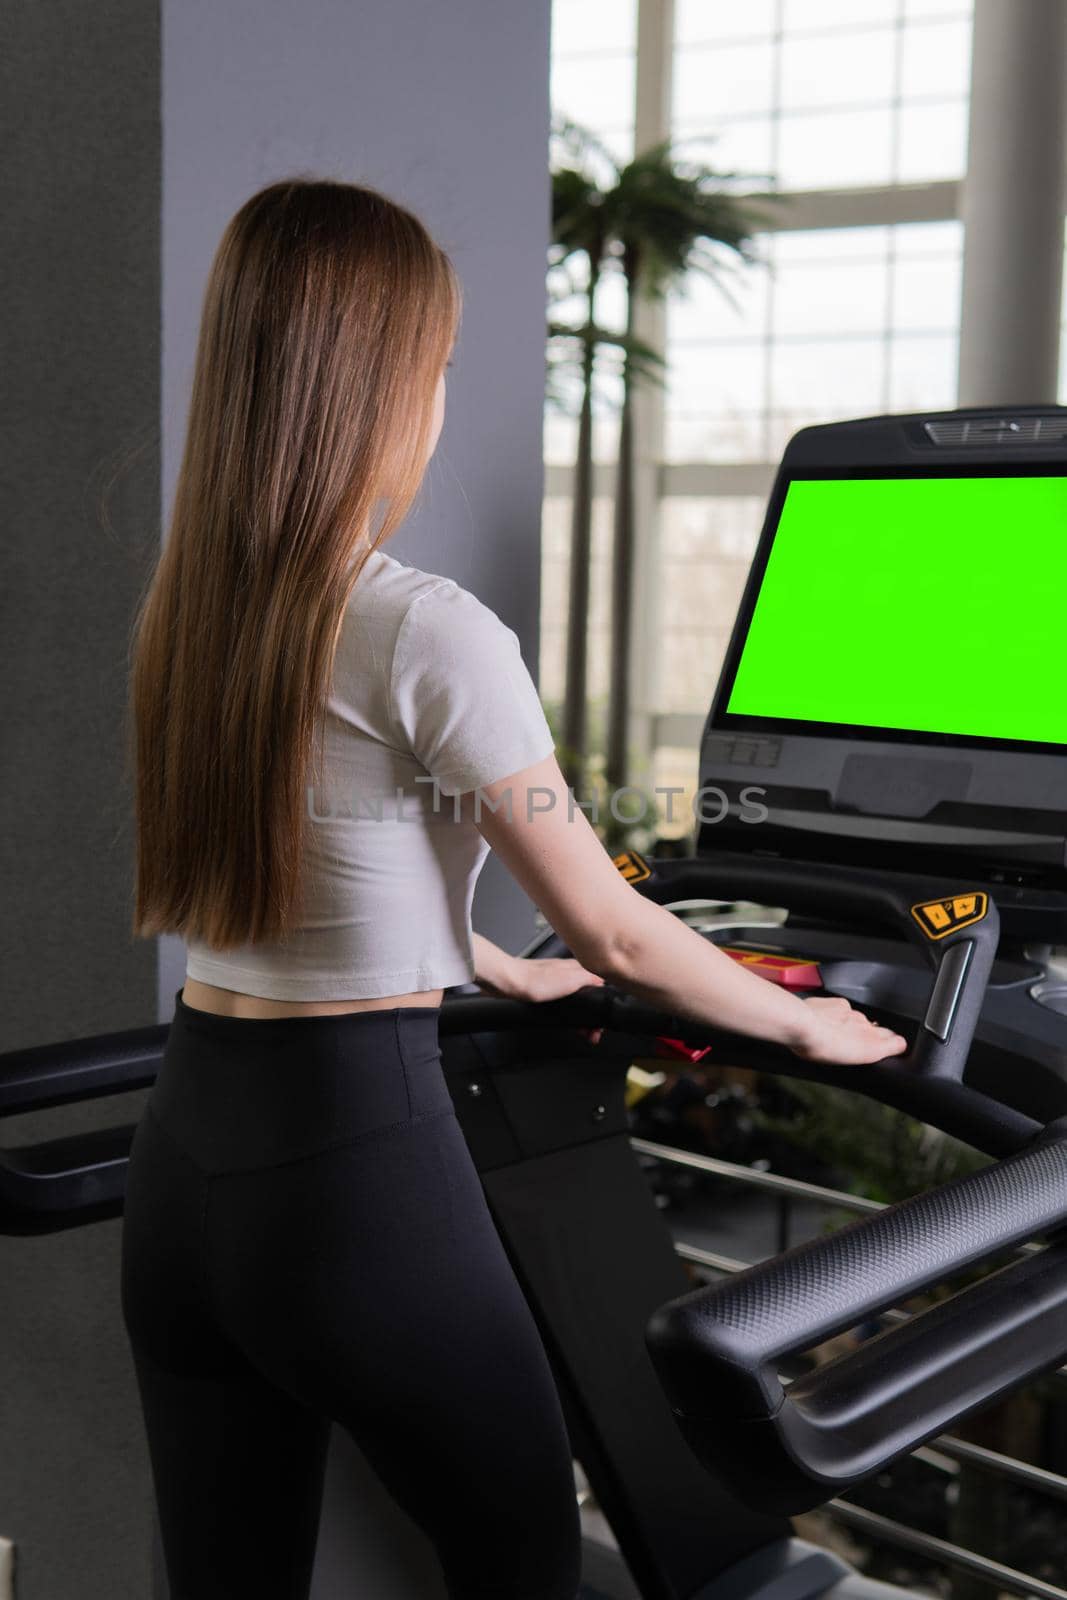 Length indoors woman treadmill young profile full running people, for workout healthy from body from adult gym, muscles together. Man care slim,